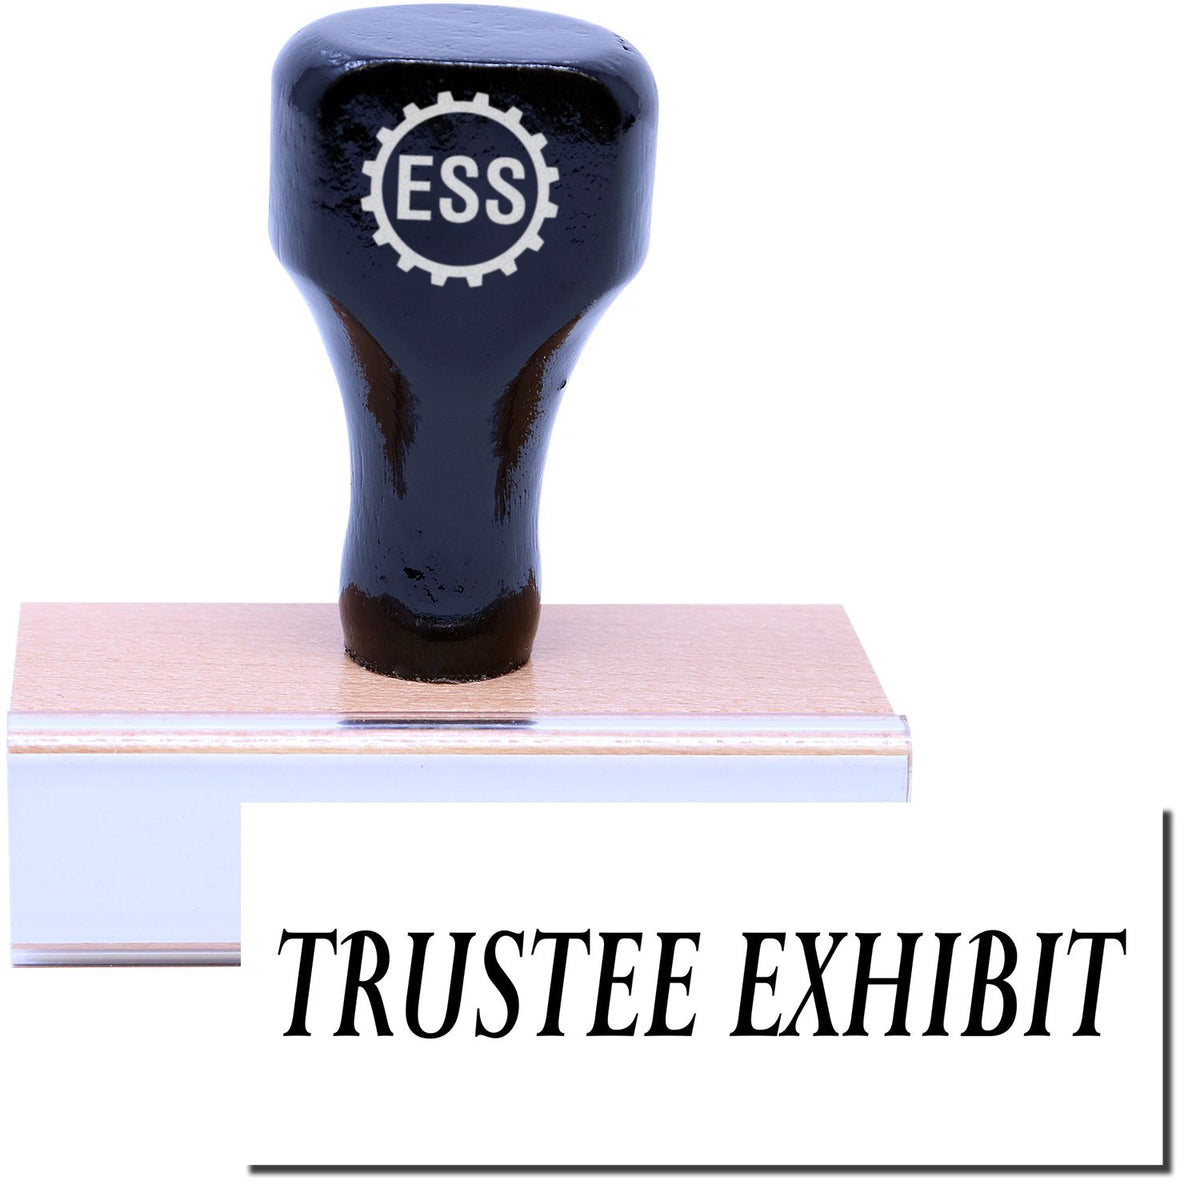 A stock office rubber stamp with a stamped image showing how the text &quot;TRUSTEE EXHIBIT&quot; is displayed after stamping.